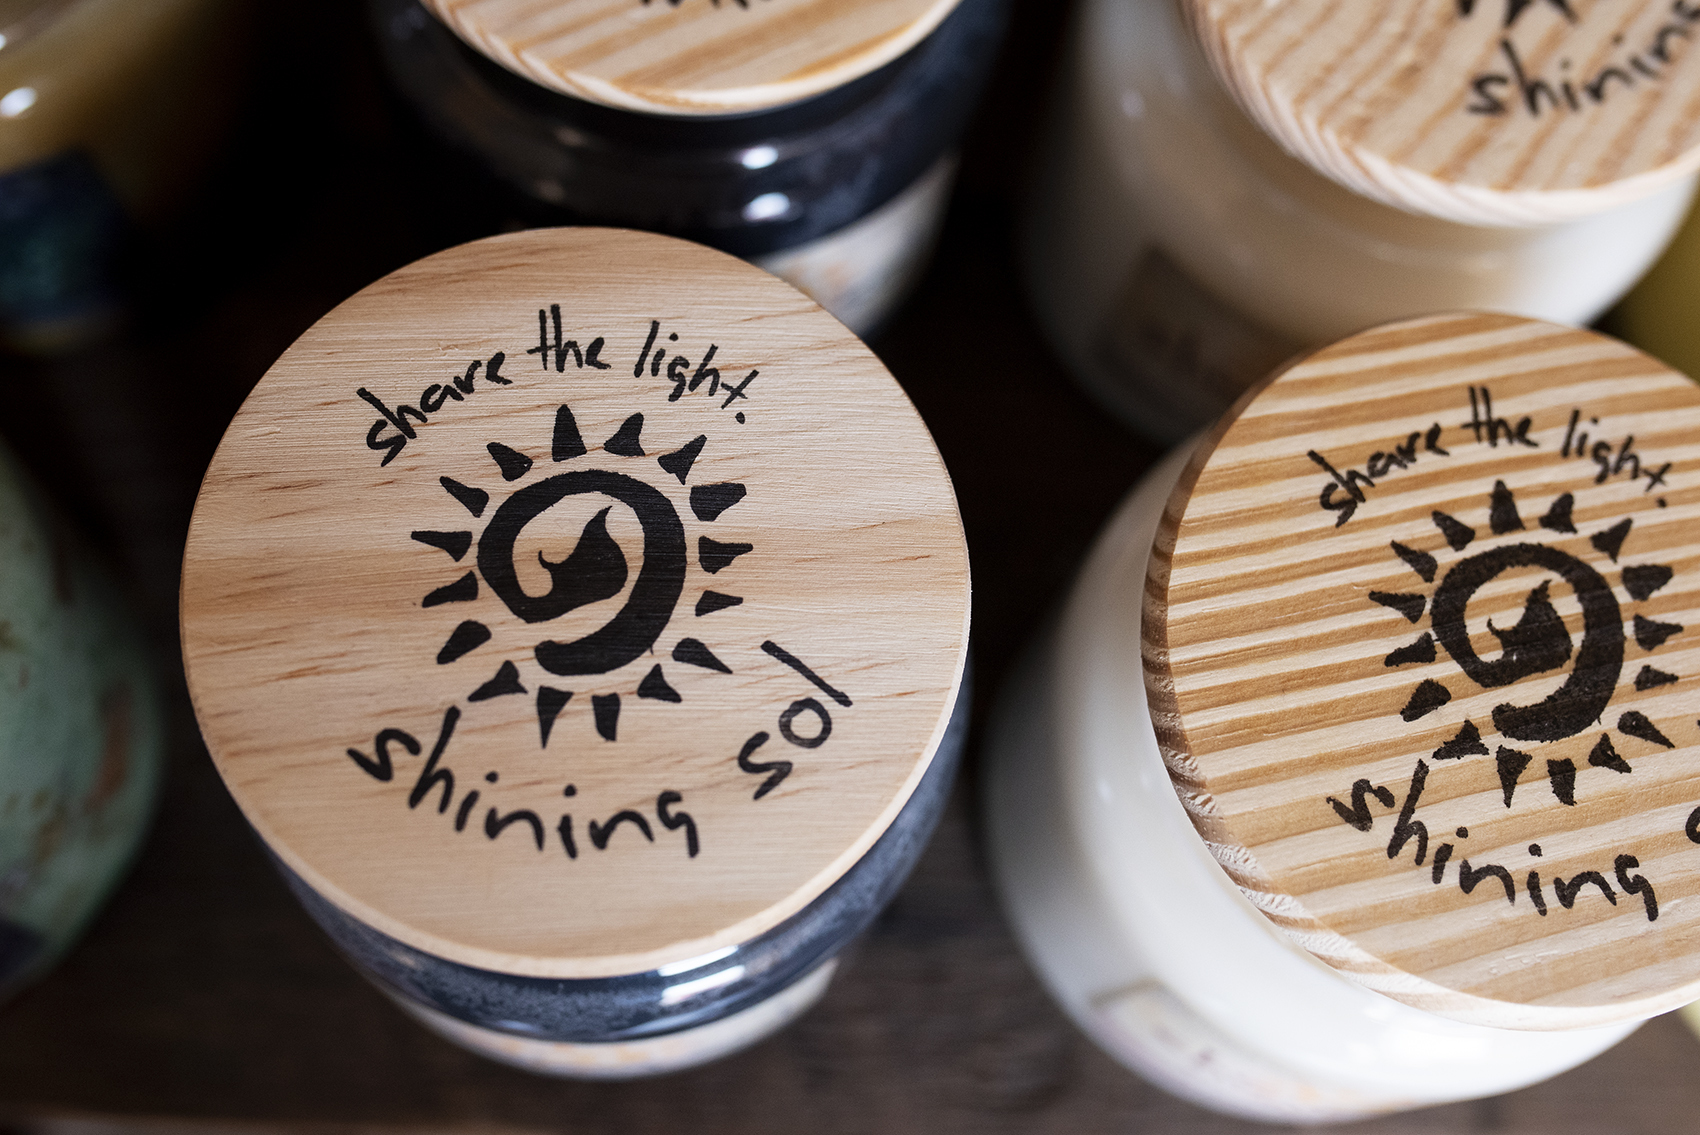 Candle lids with Shining Sol logo on top.